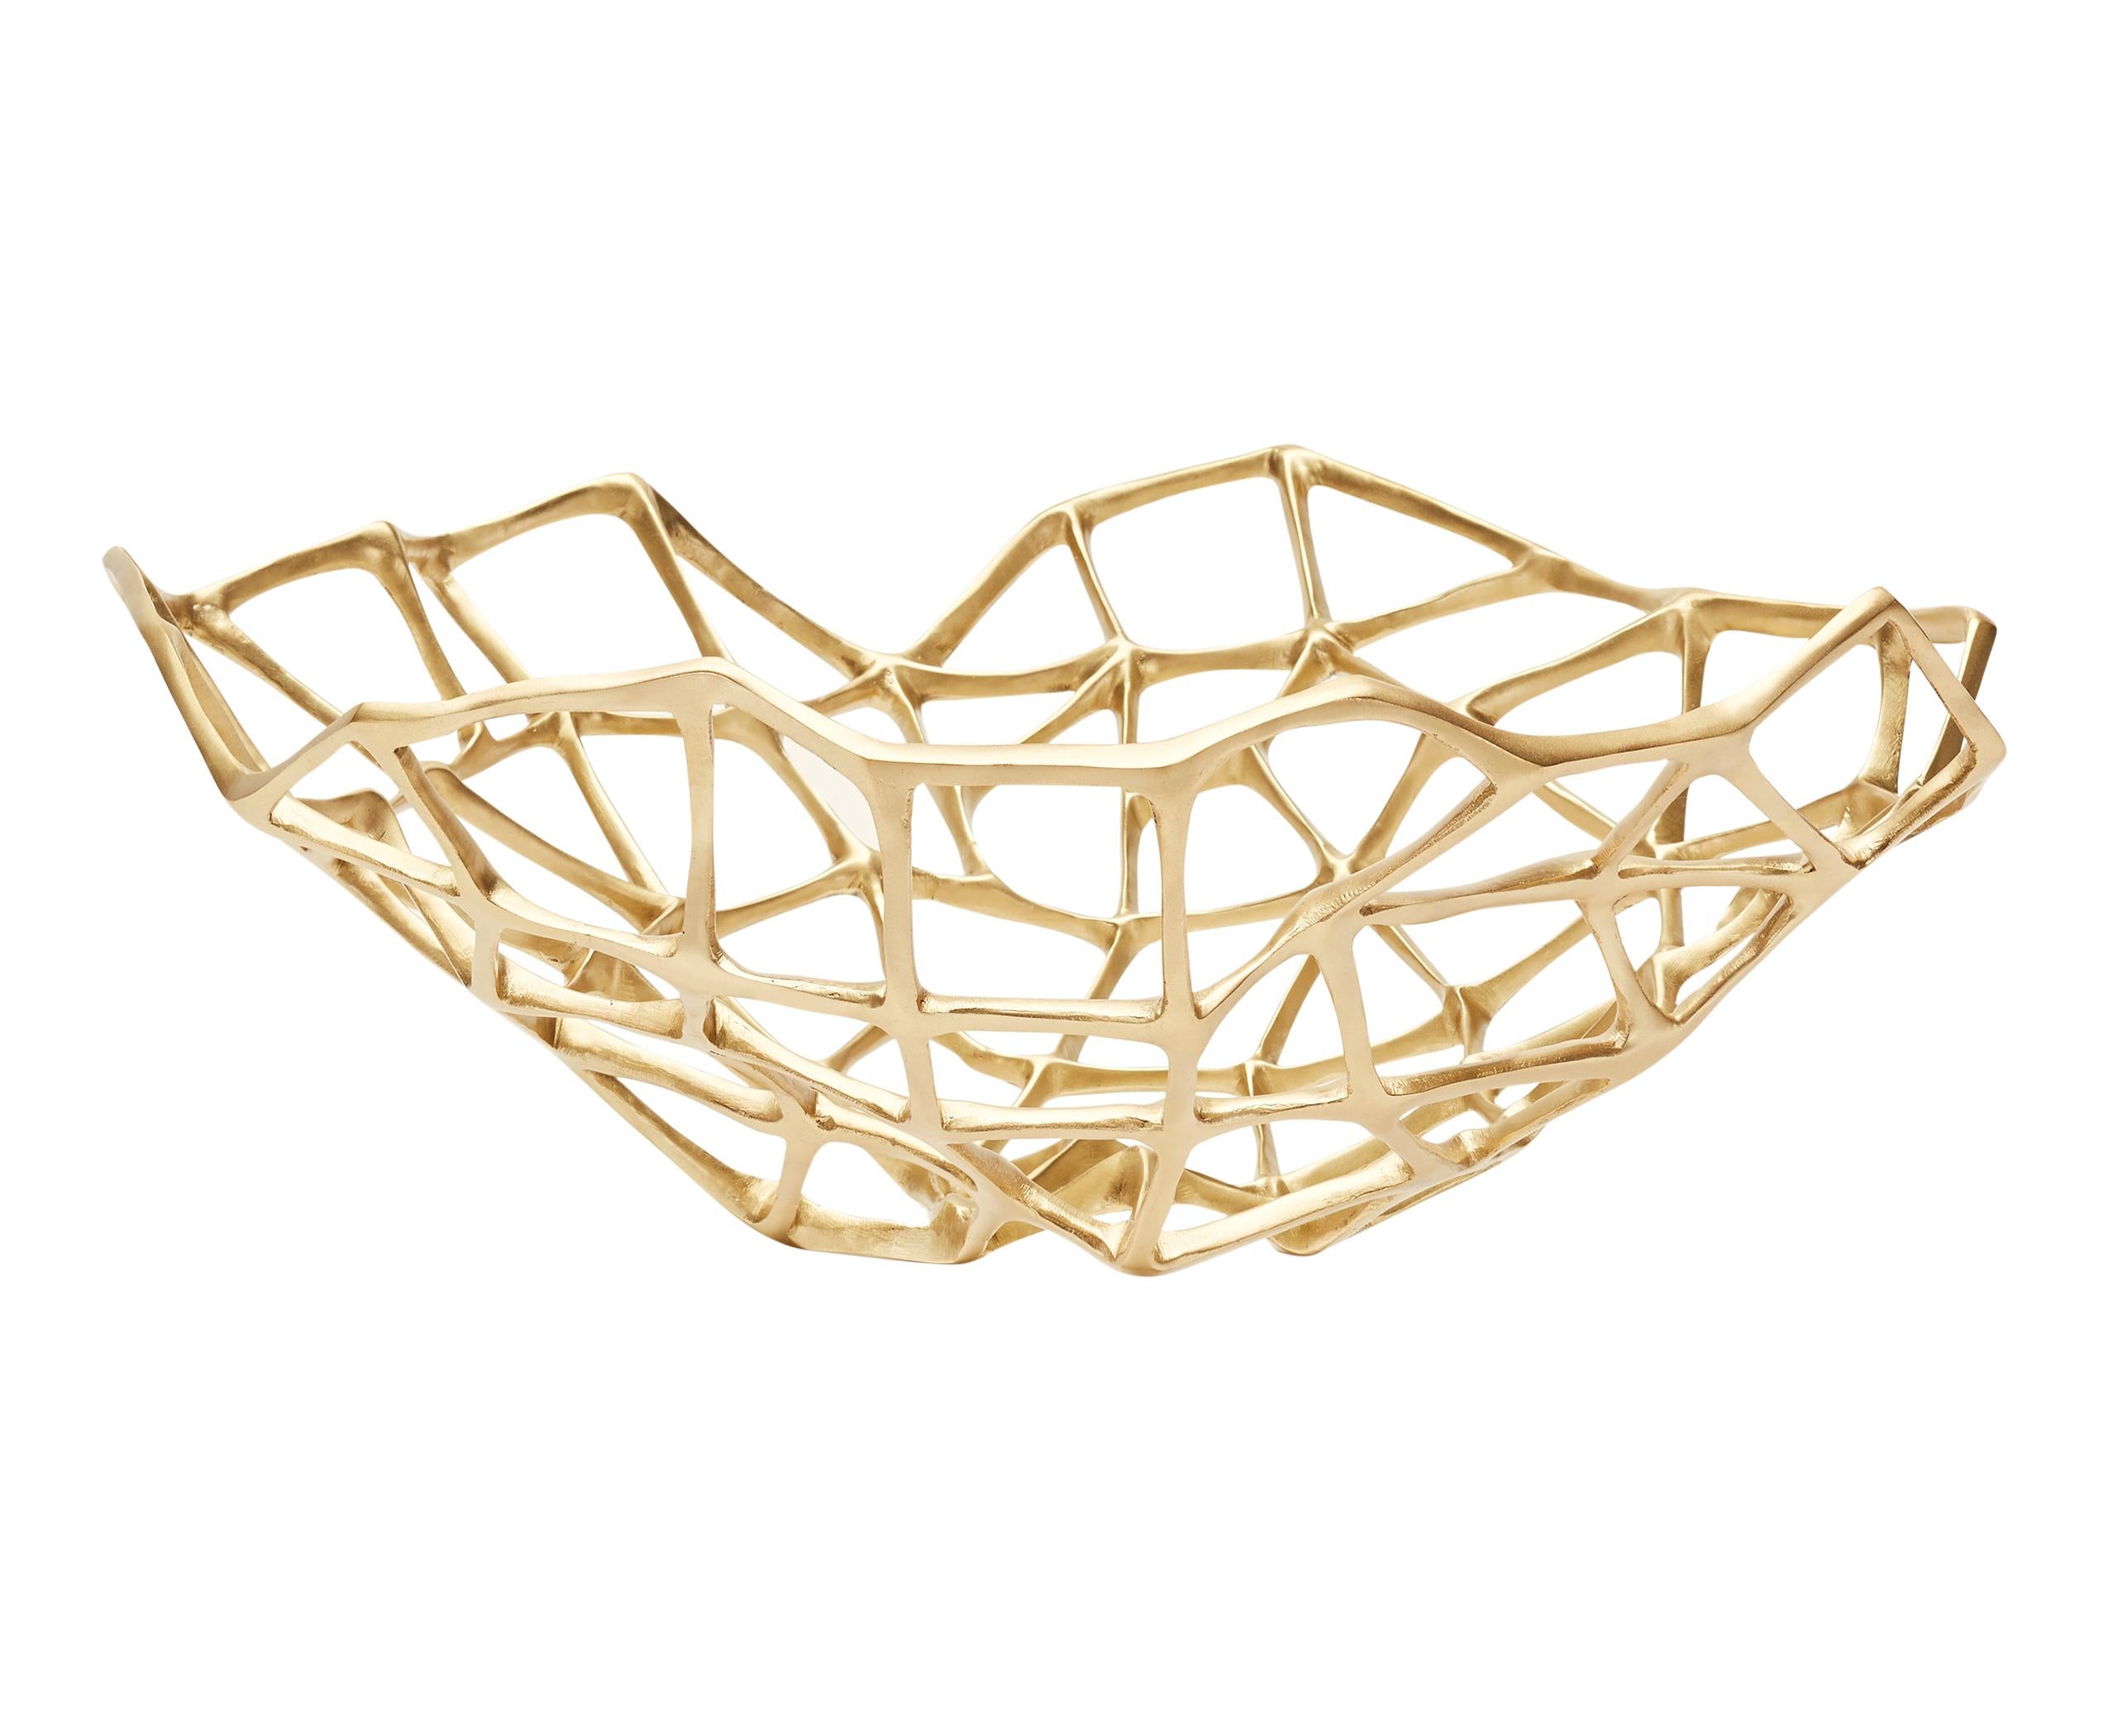 The extra large bone bowl is part of a series of sculptural artefacts cast in solid brass with a matte finish bearing a bone-like quality. Bone bowls can be displayed on their own as sculptures or used with dry food and decorations such as